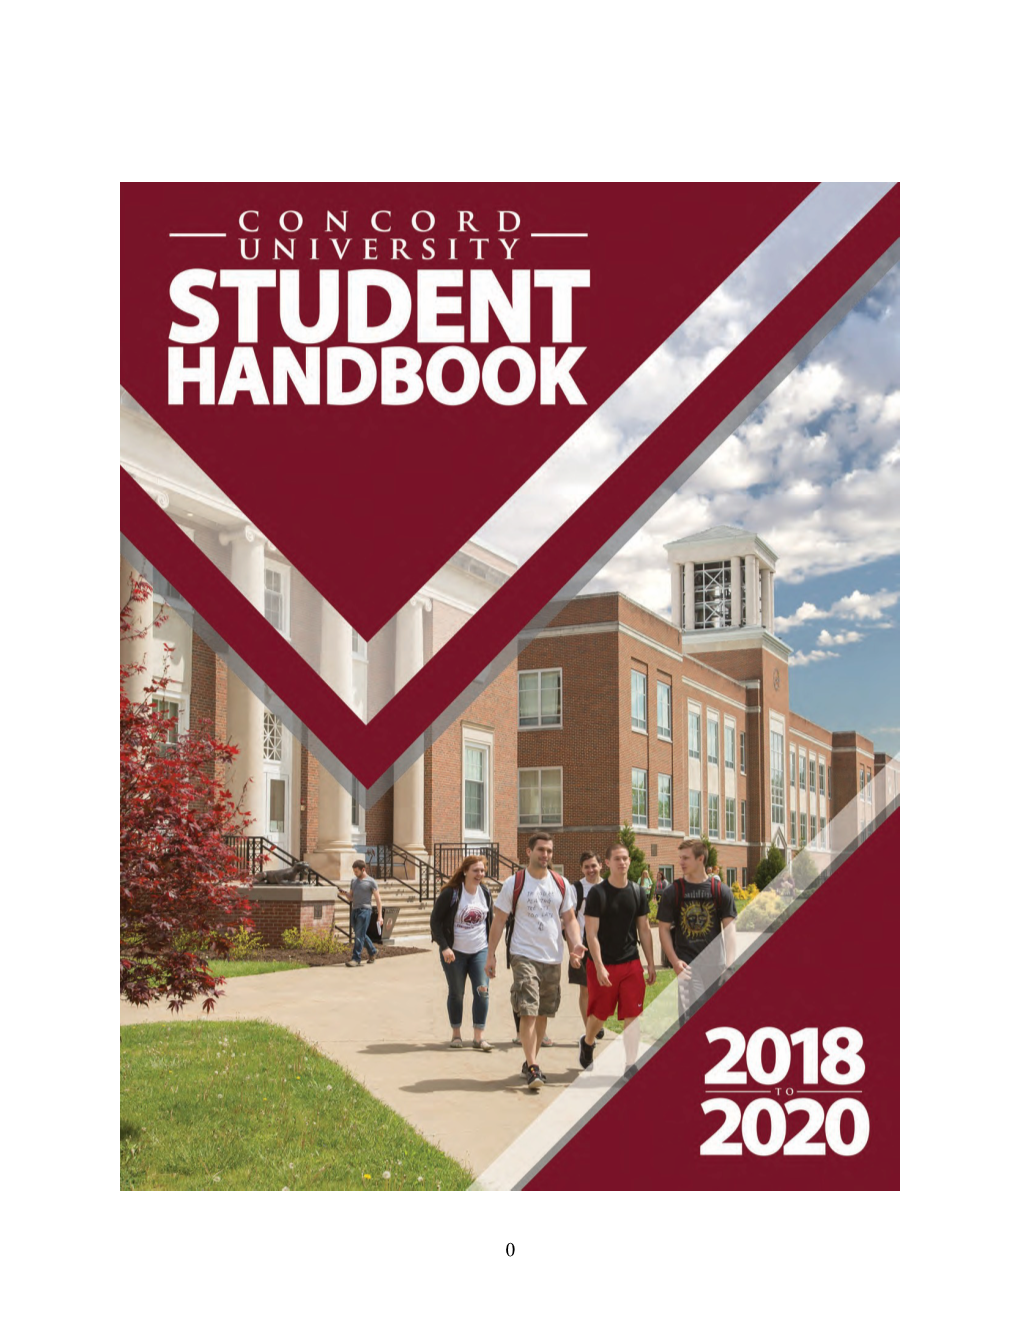 Concord University Student Handbook for Policies and Protocols, Or Request Copies from the Office of Student Affairs